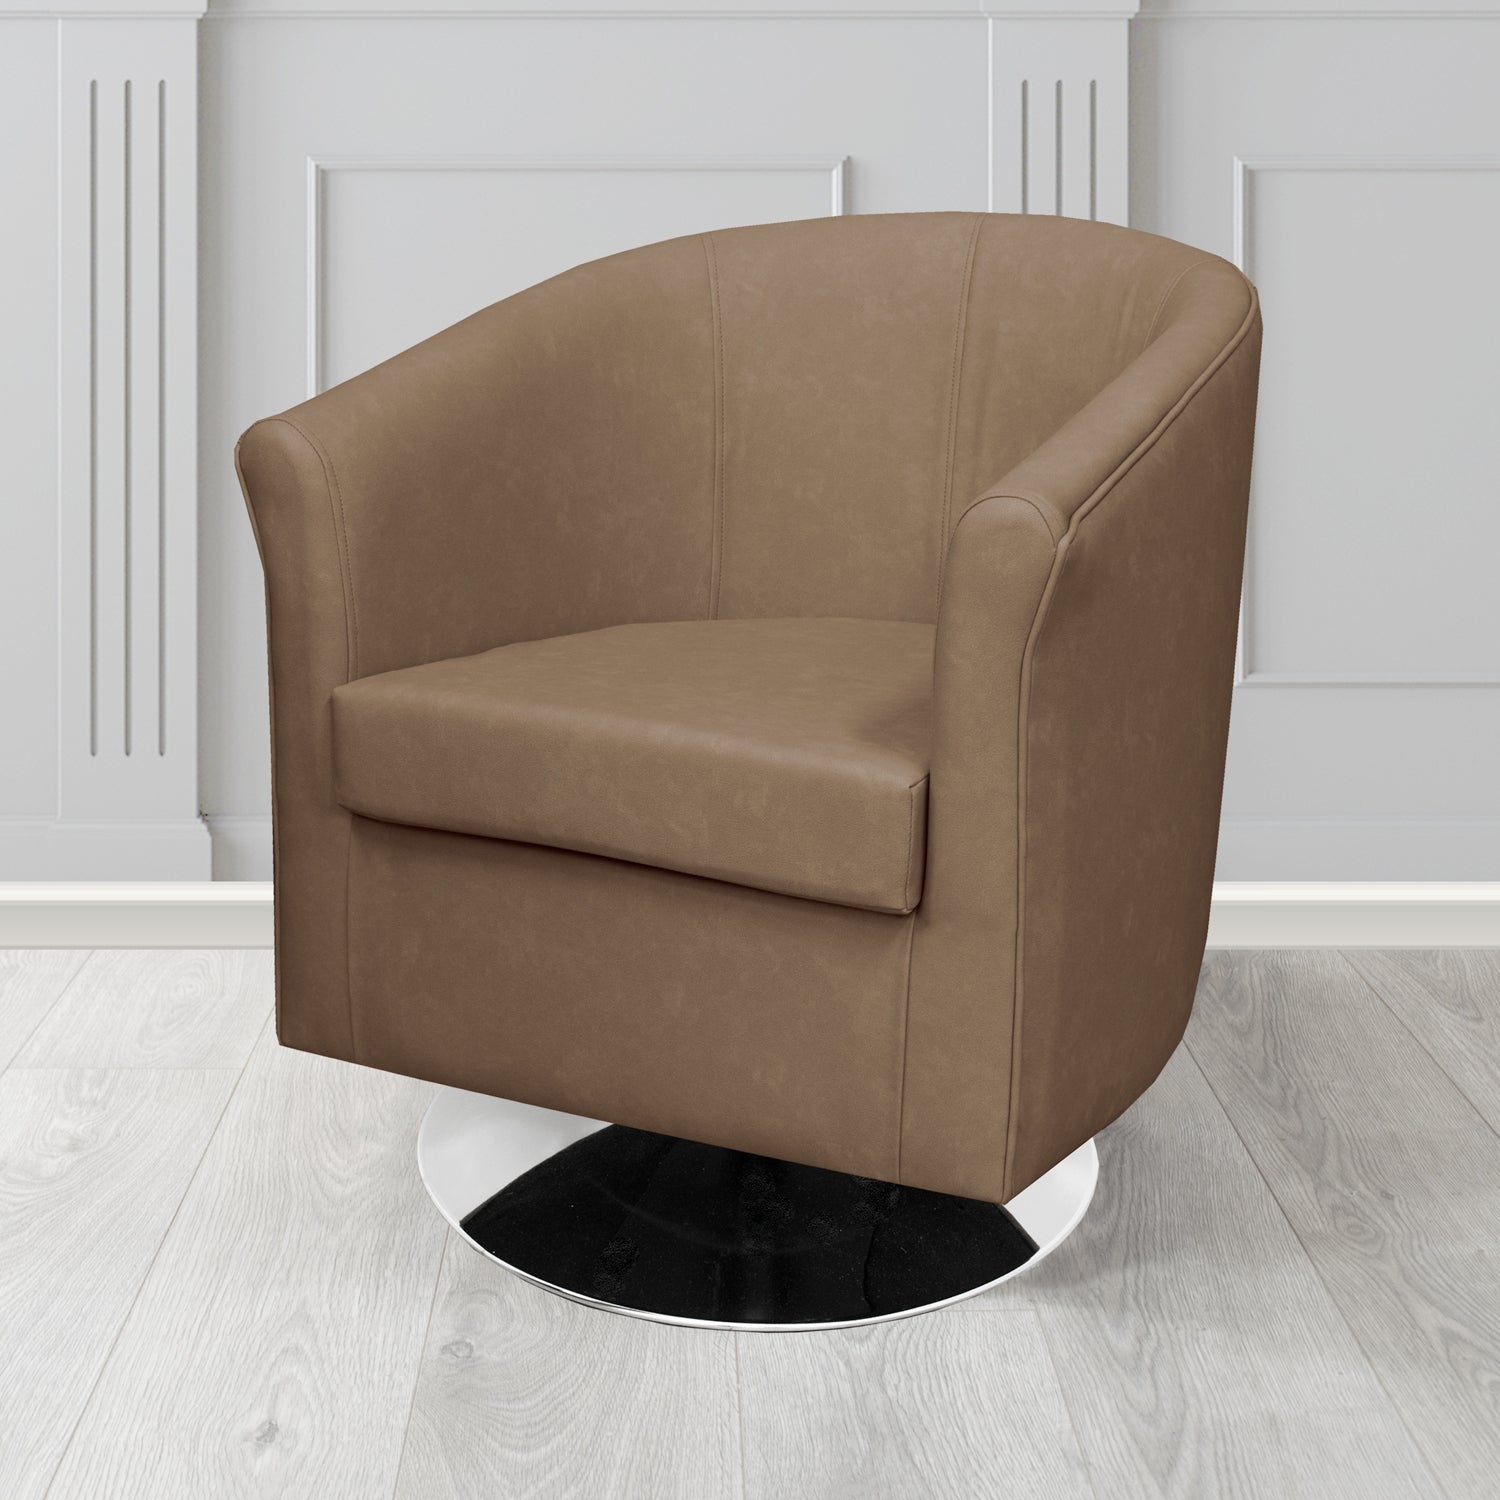 Tuscany Swivel Tub Chair in Infiniti Truffle INF1848 Antimicrobial Crib 5 Faux Leather - The Tub Chair Shop